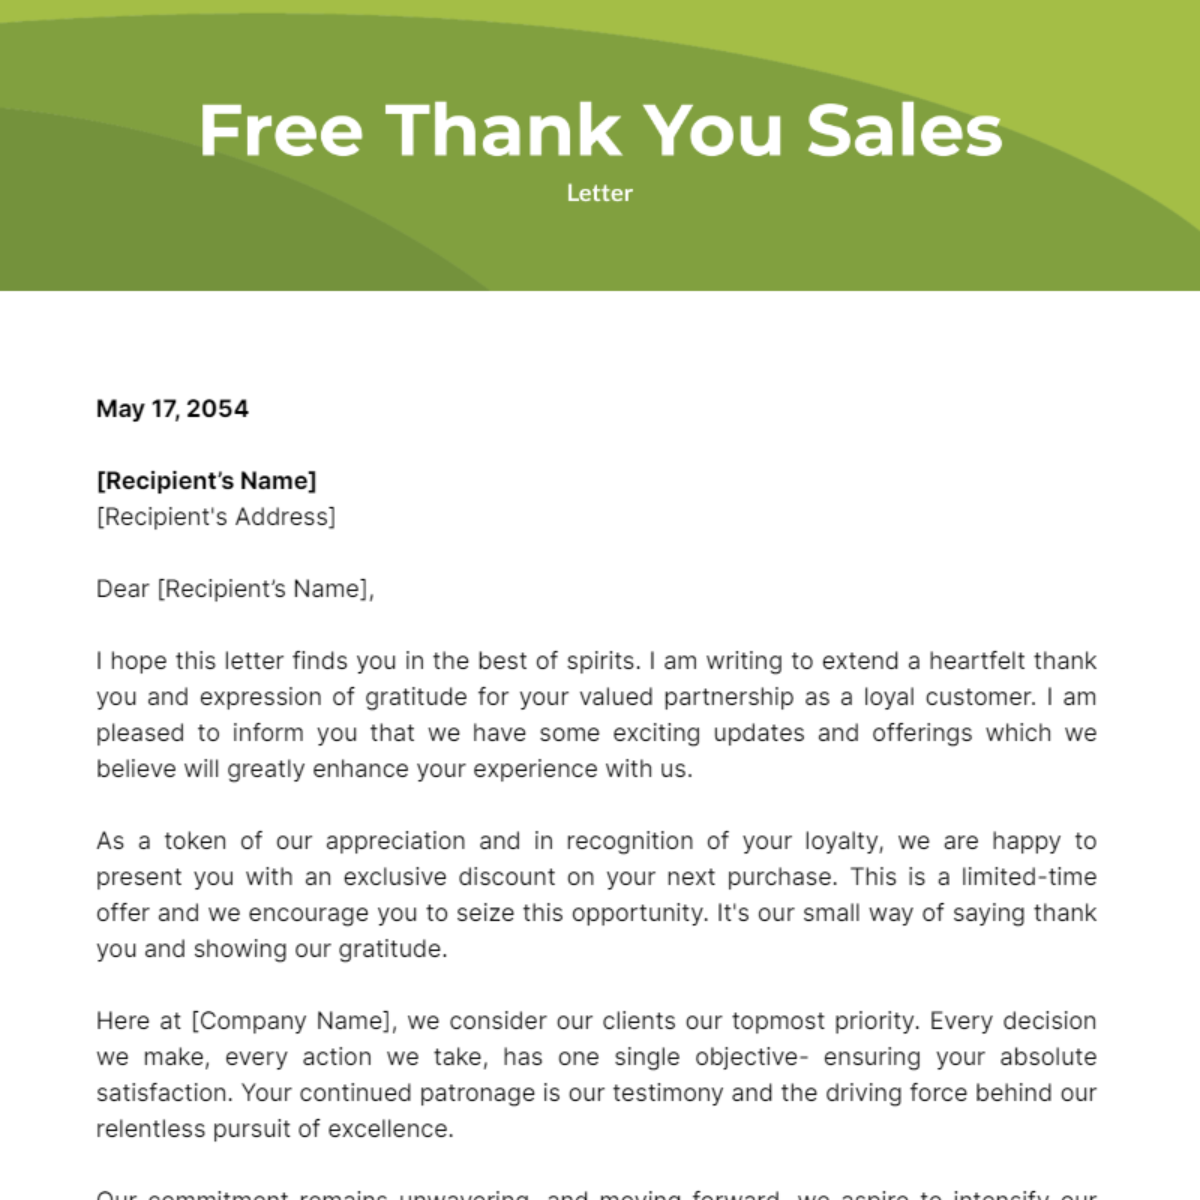 Thank You Sales Letter Template